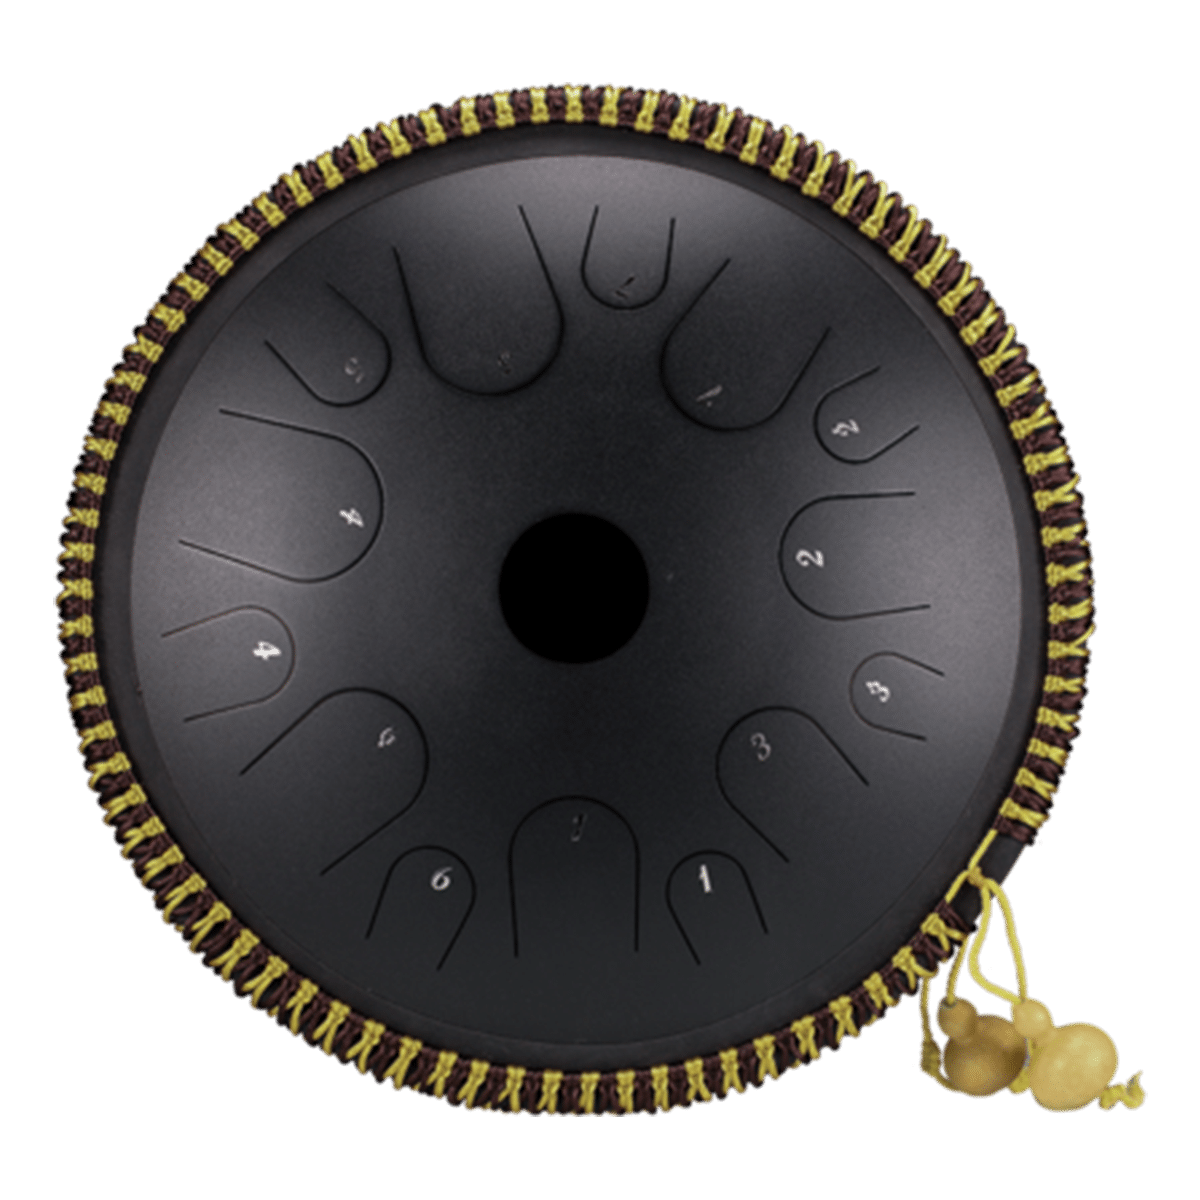 14 Inch 15 Note Steel Tongue Drum Percussion Instrument 14 Inch 15  Note-Black